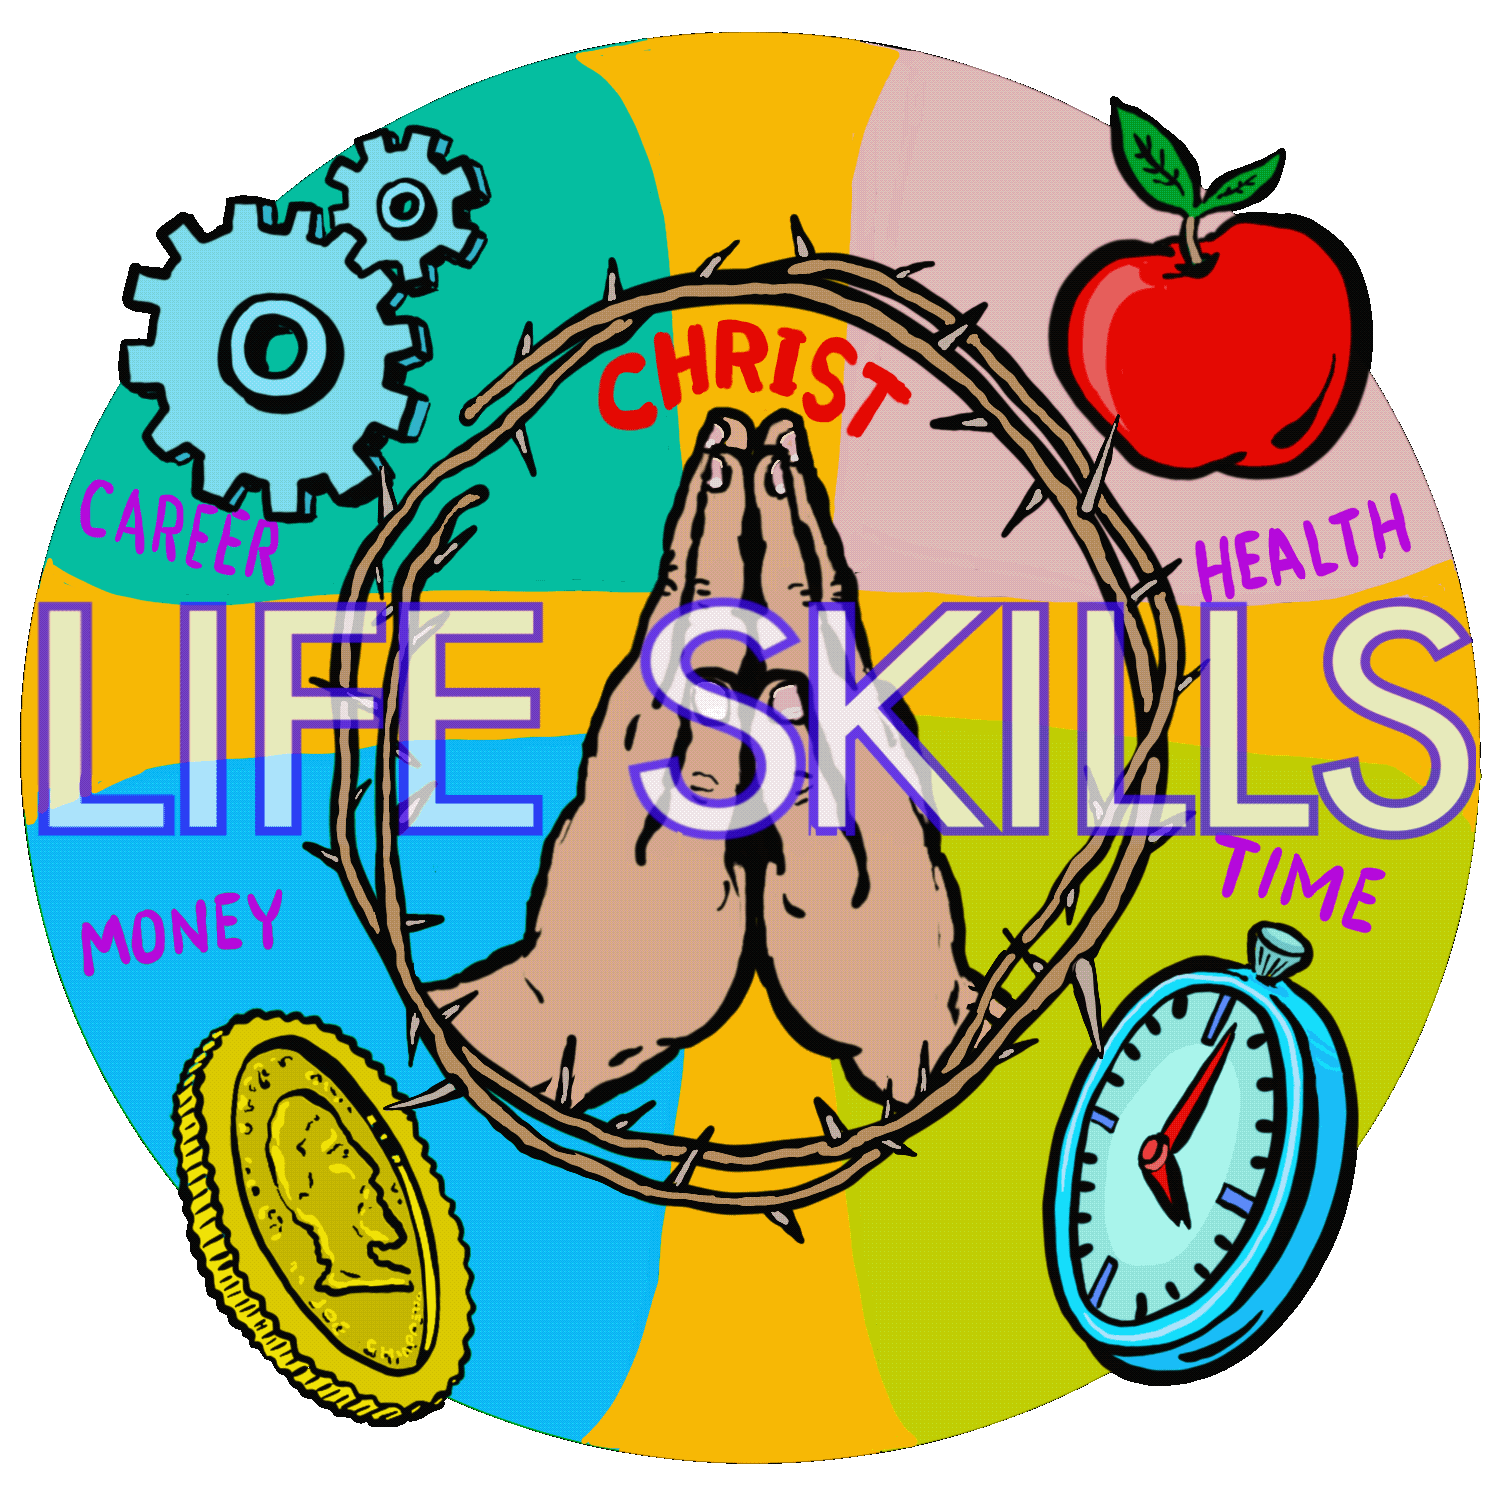 Life Skills book by Joe and Denise Chiappetta